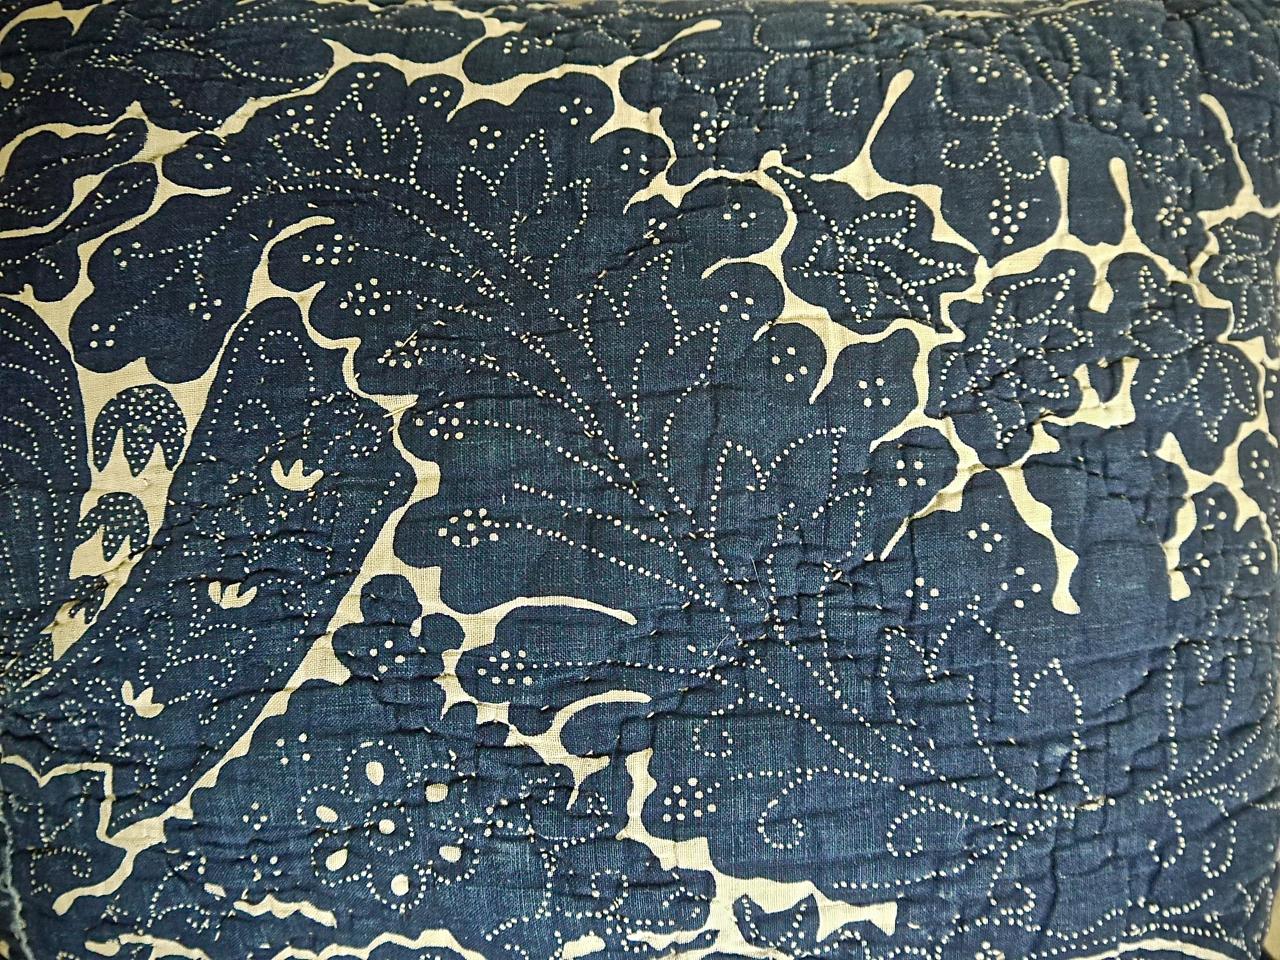 French indigo resist block printed cotton cushion probably from Rouen in Northern France. A striking design of arching acanthus leaves and stylized floral and leaf motifs. Simply quilted and backed in a dyed 19th century French linen. Slip-stitched